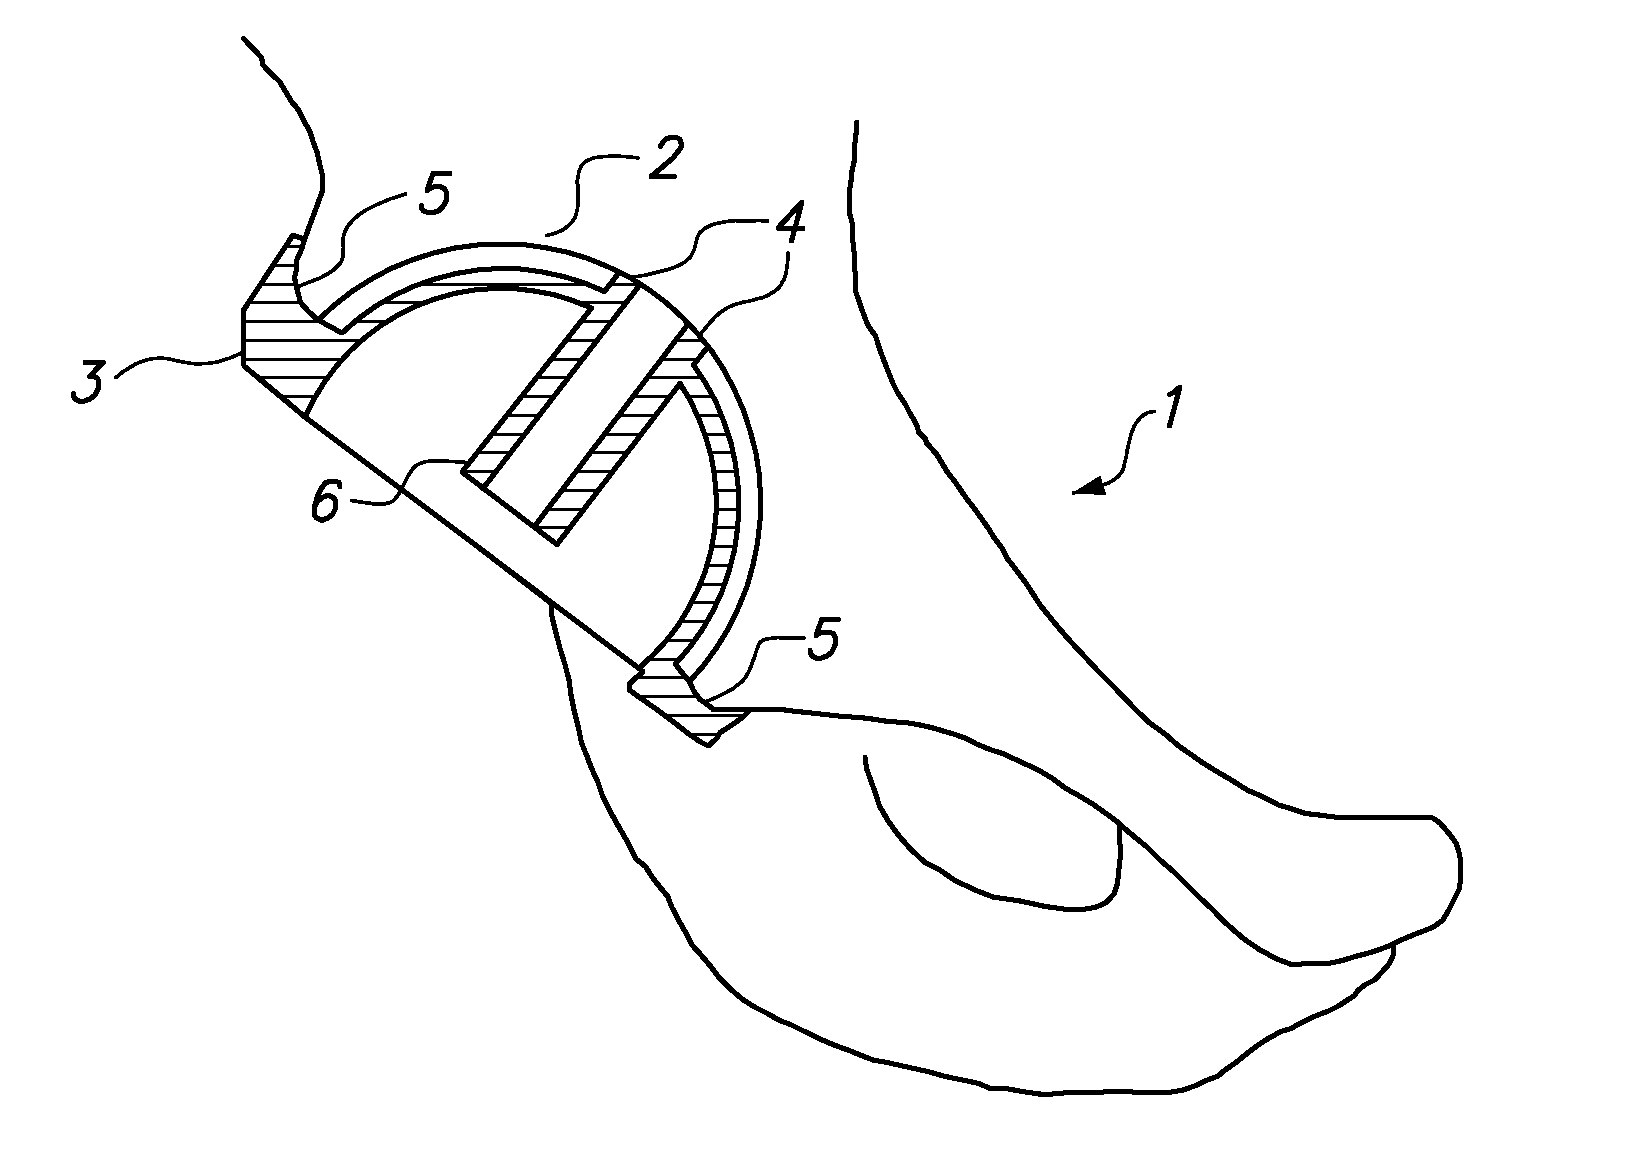 Device and method for achieving accurate positioning of acetabular cup during total hip replacement